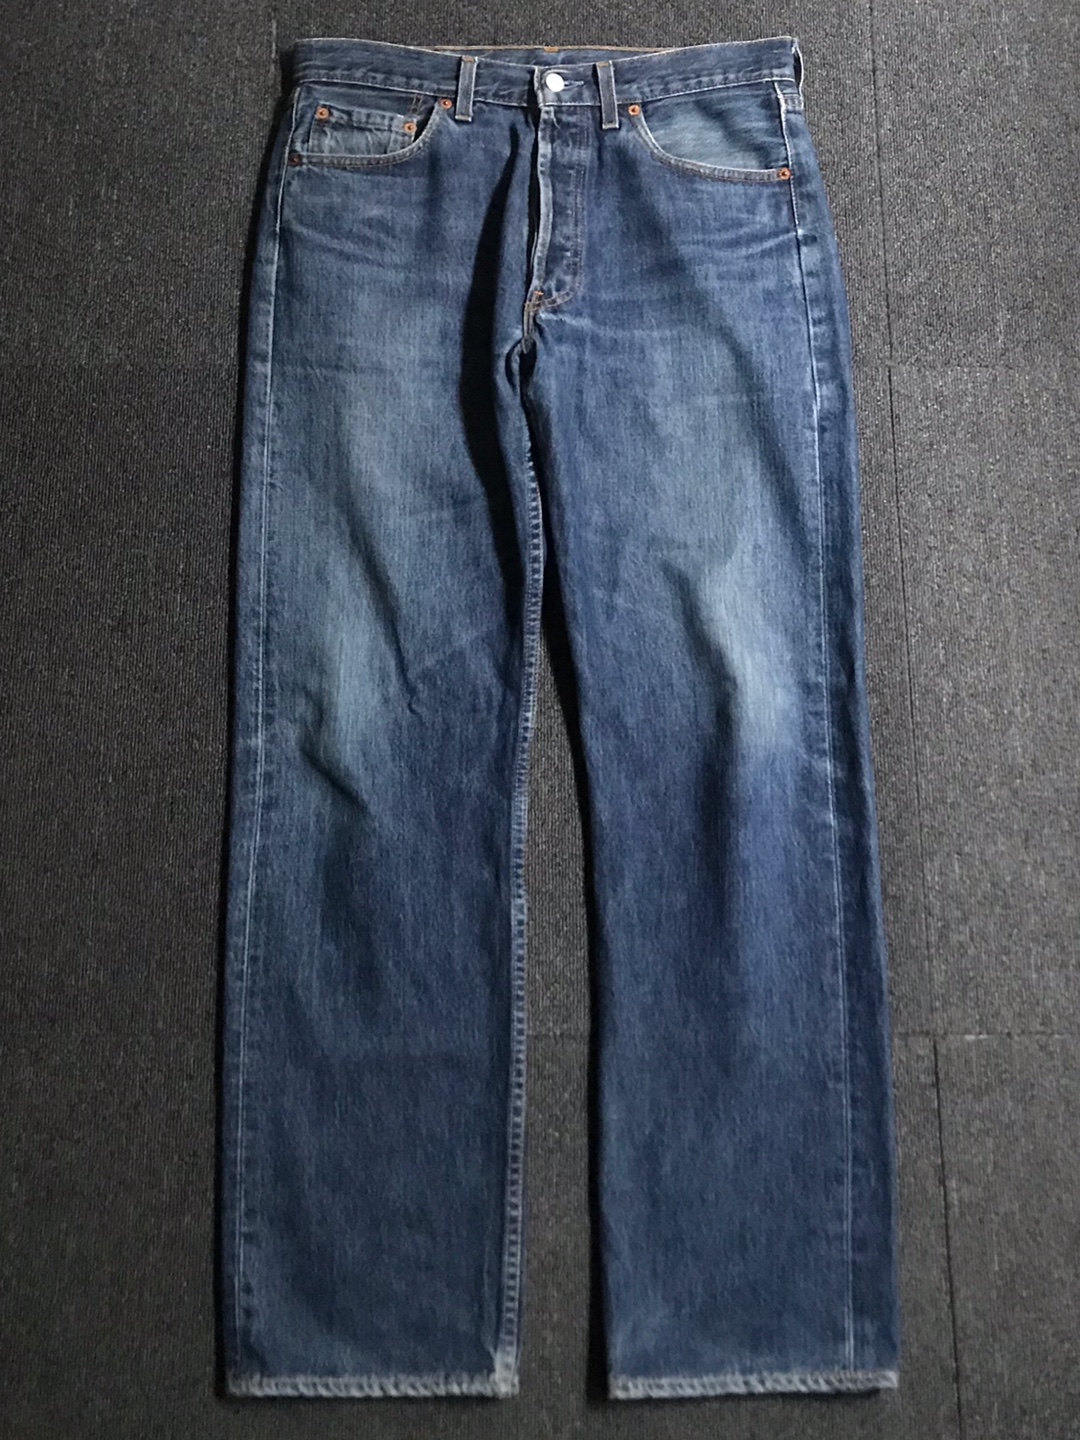 90s levis 501 UK made (33/30 size, ~32인치 추천)